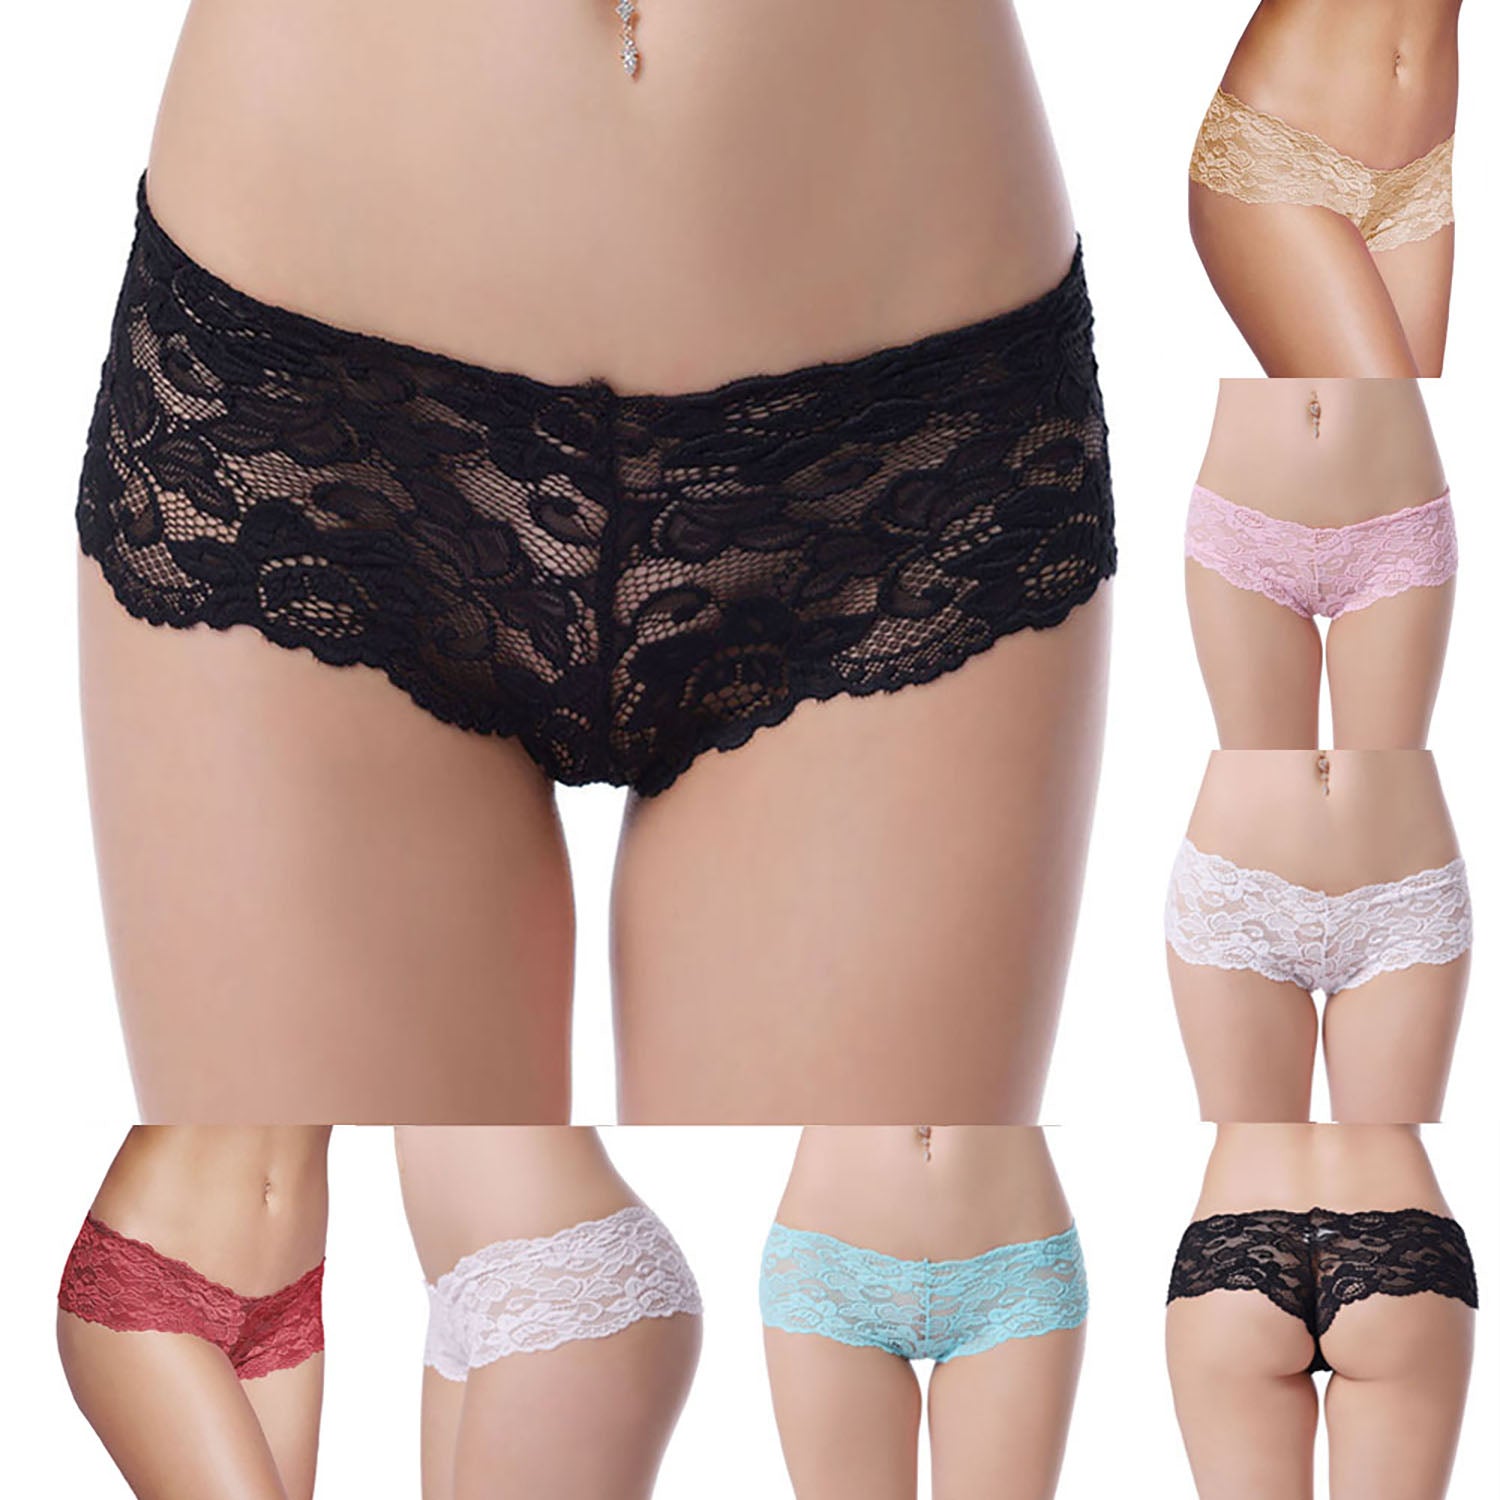 Simply Joshimo Floral Lace French Briefs (White)